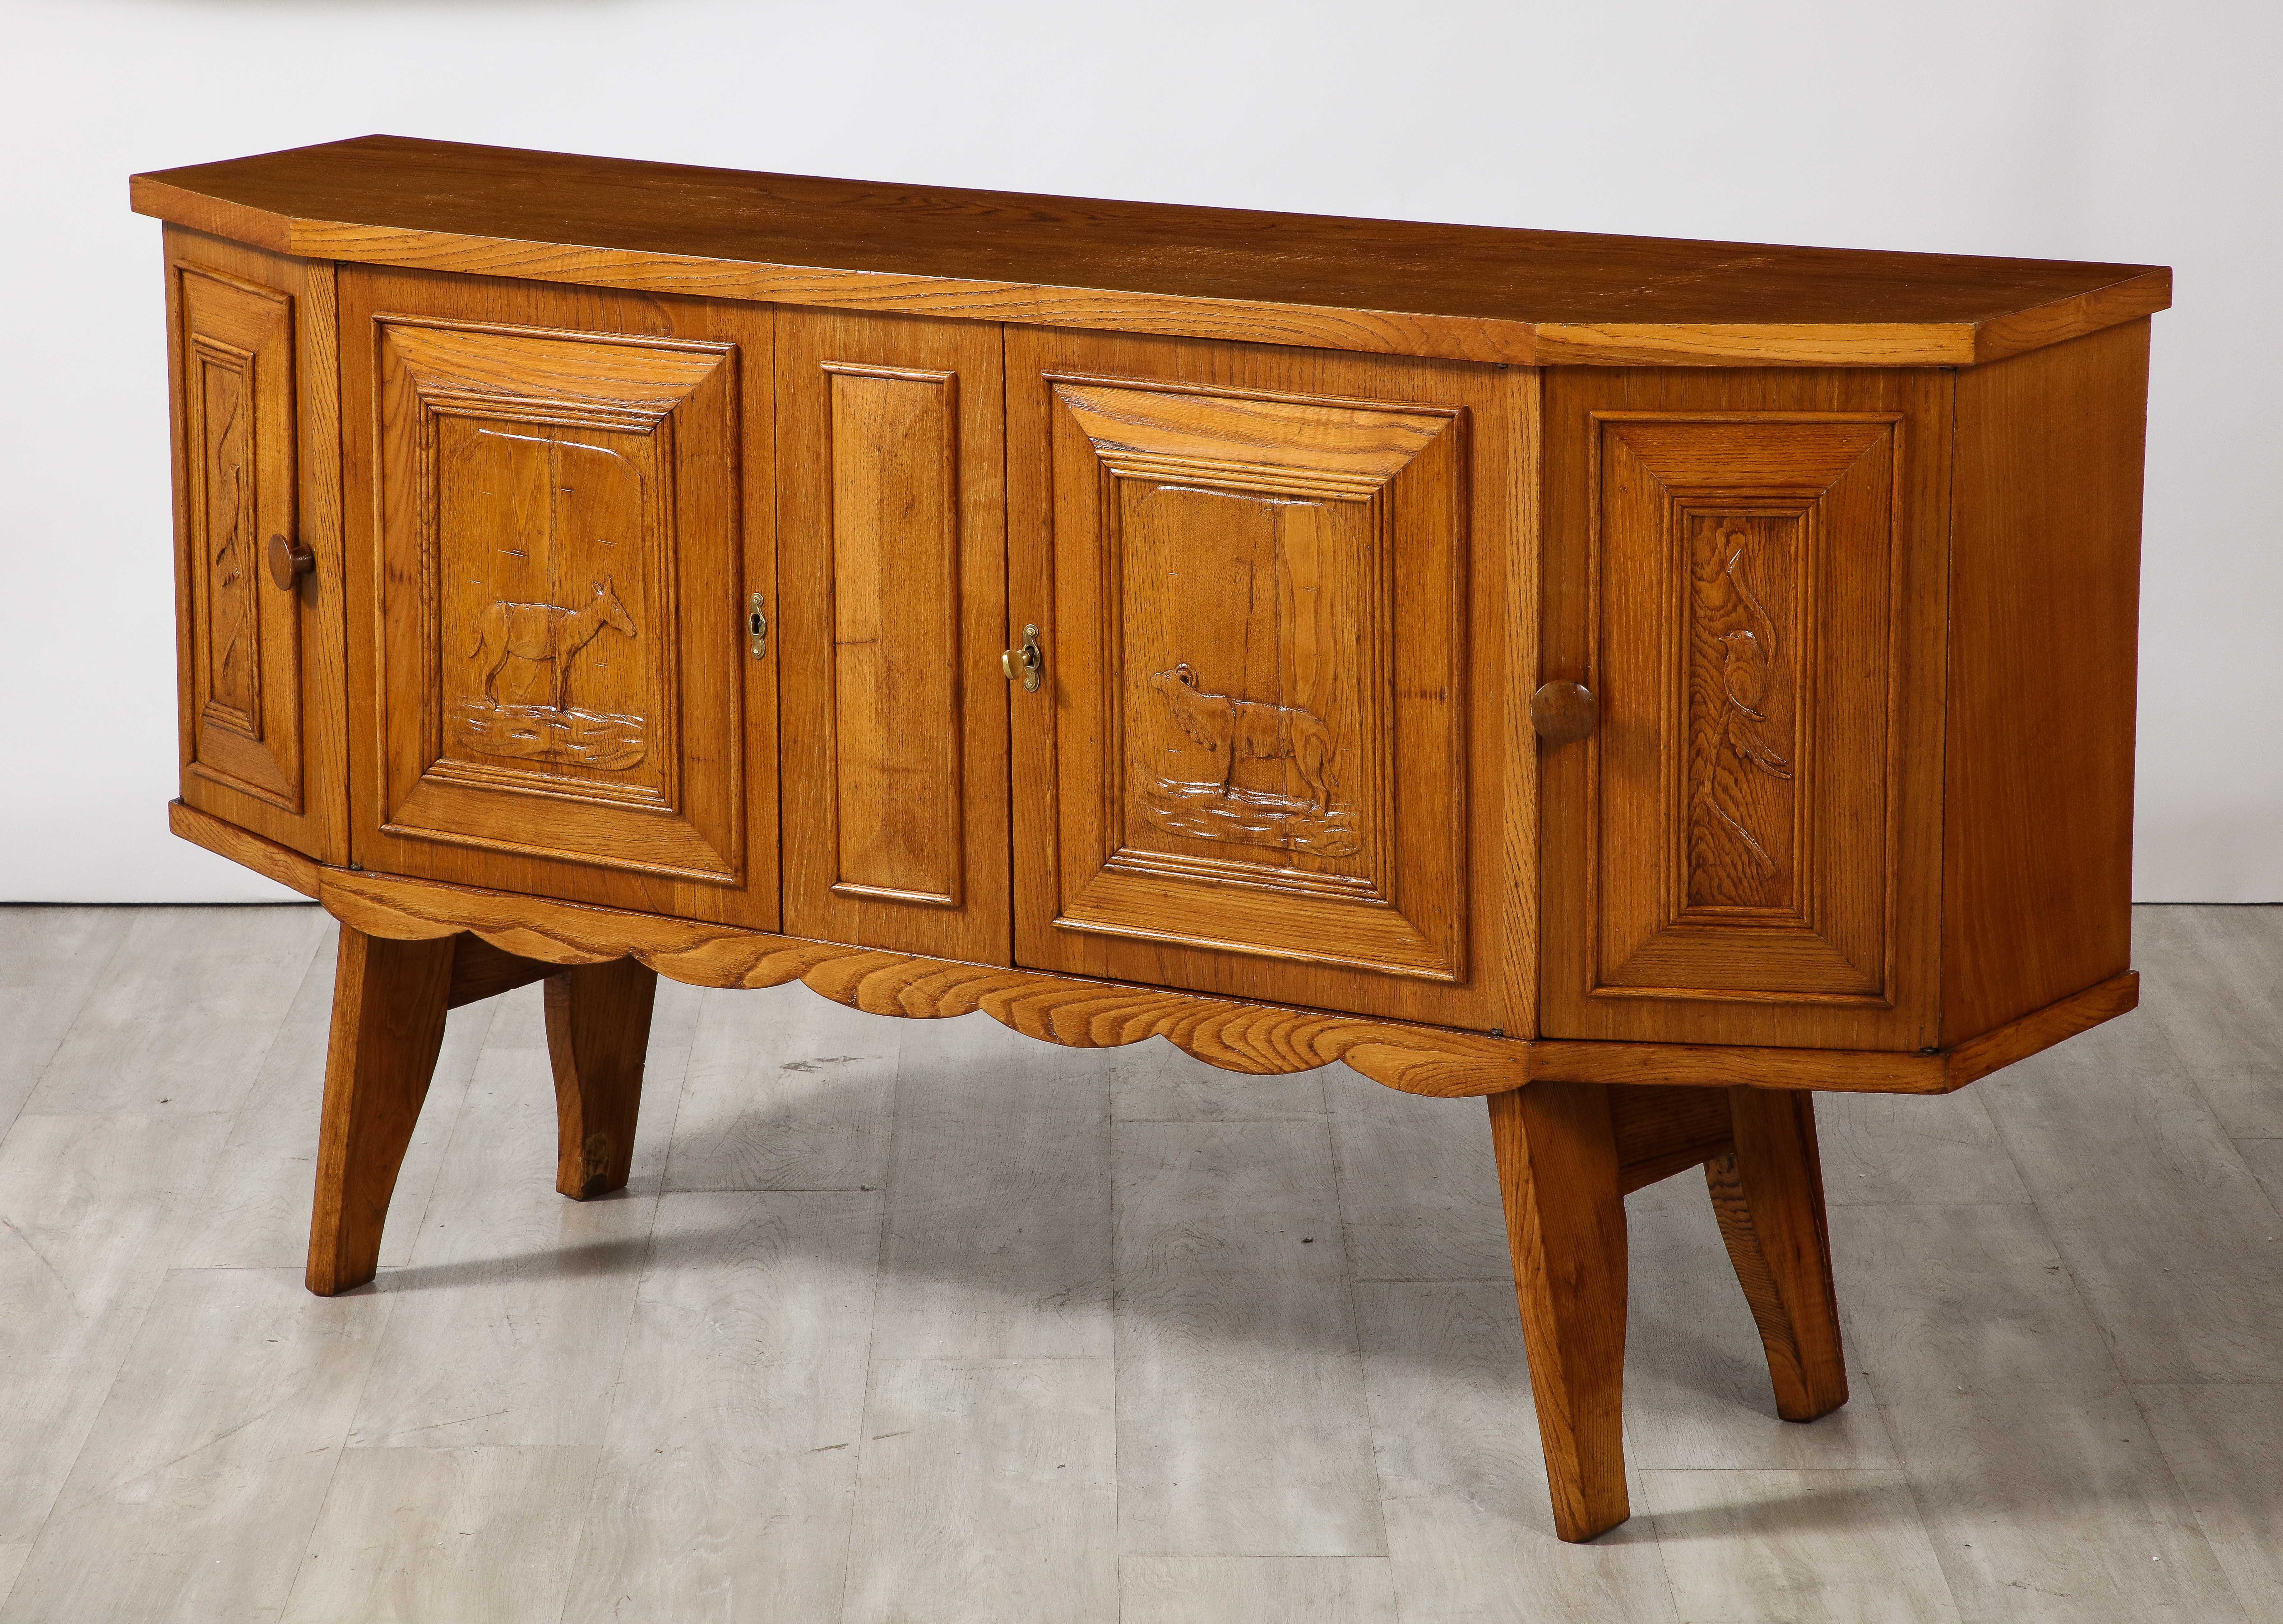 A charming and beautiful Tuscan hand-carved oak credenza or side board, circa 1940. 

The piece displays excellent craftsmanship combined with an eye for composition and functionality. The whole case with four doors, each with raised panels; the